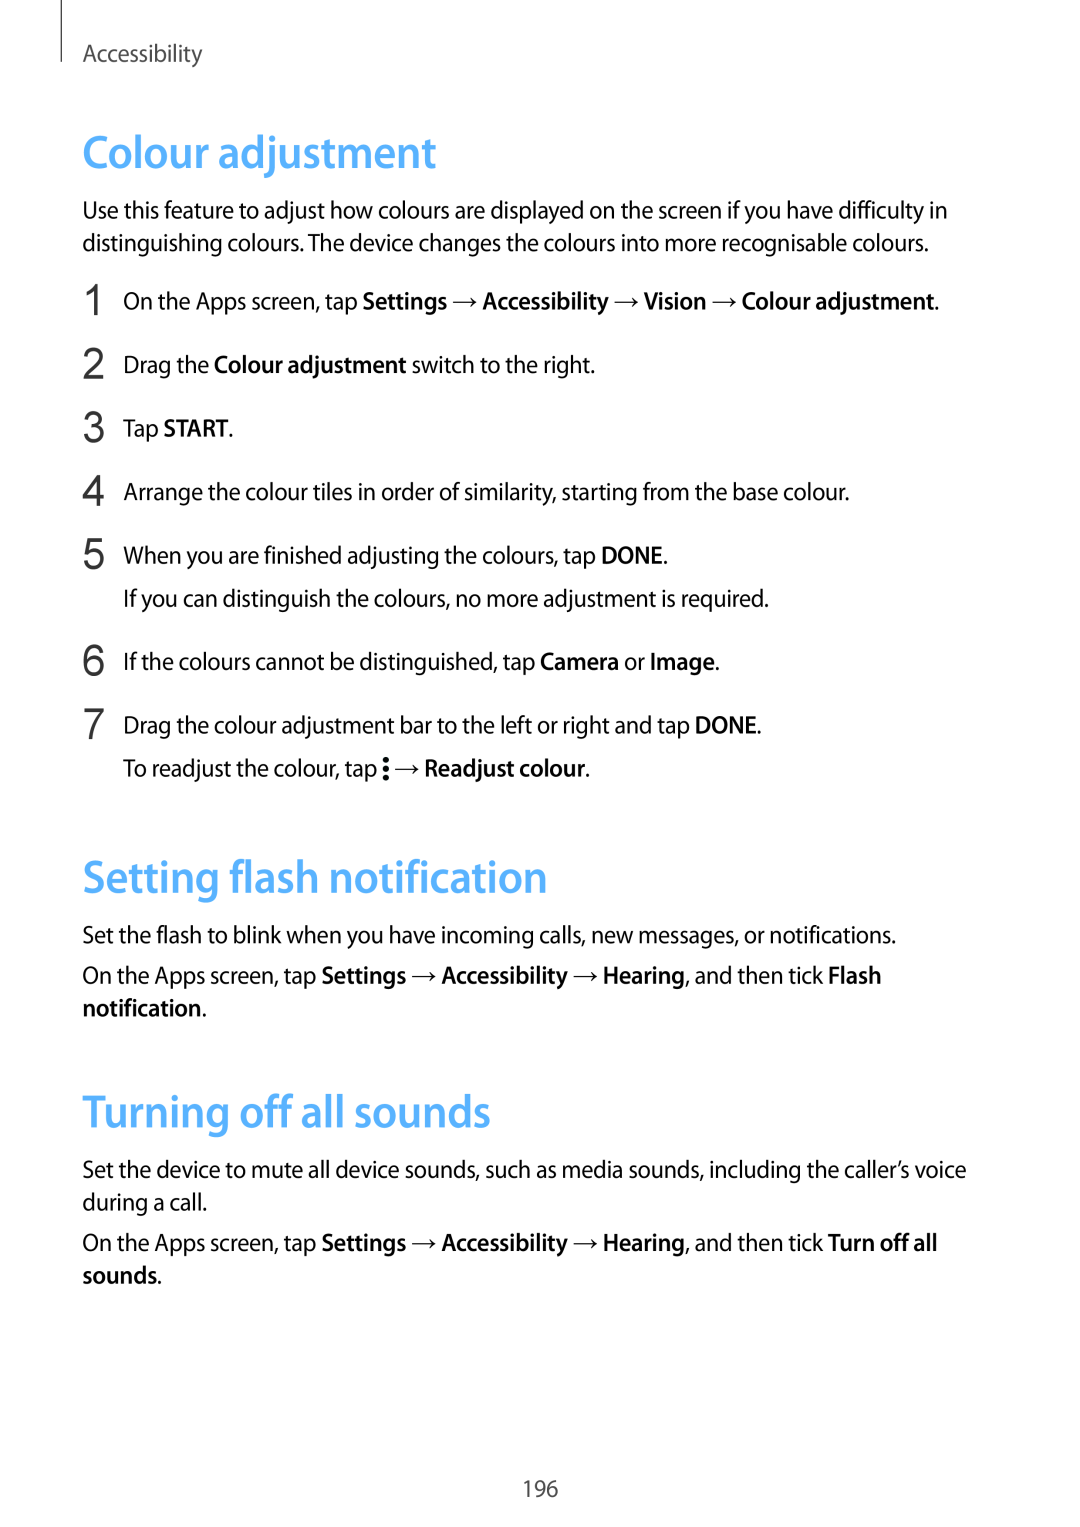 Samsung SM-G901FZKACOS manual Colour adjustment, Setting flash notification, Turning off all sounds, Accessibility 